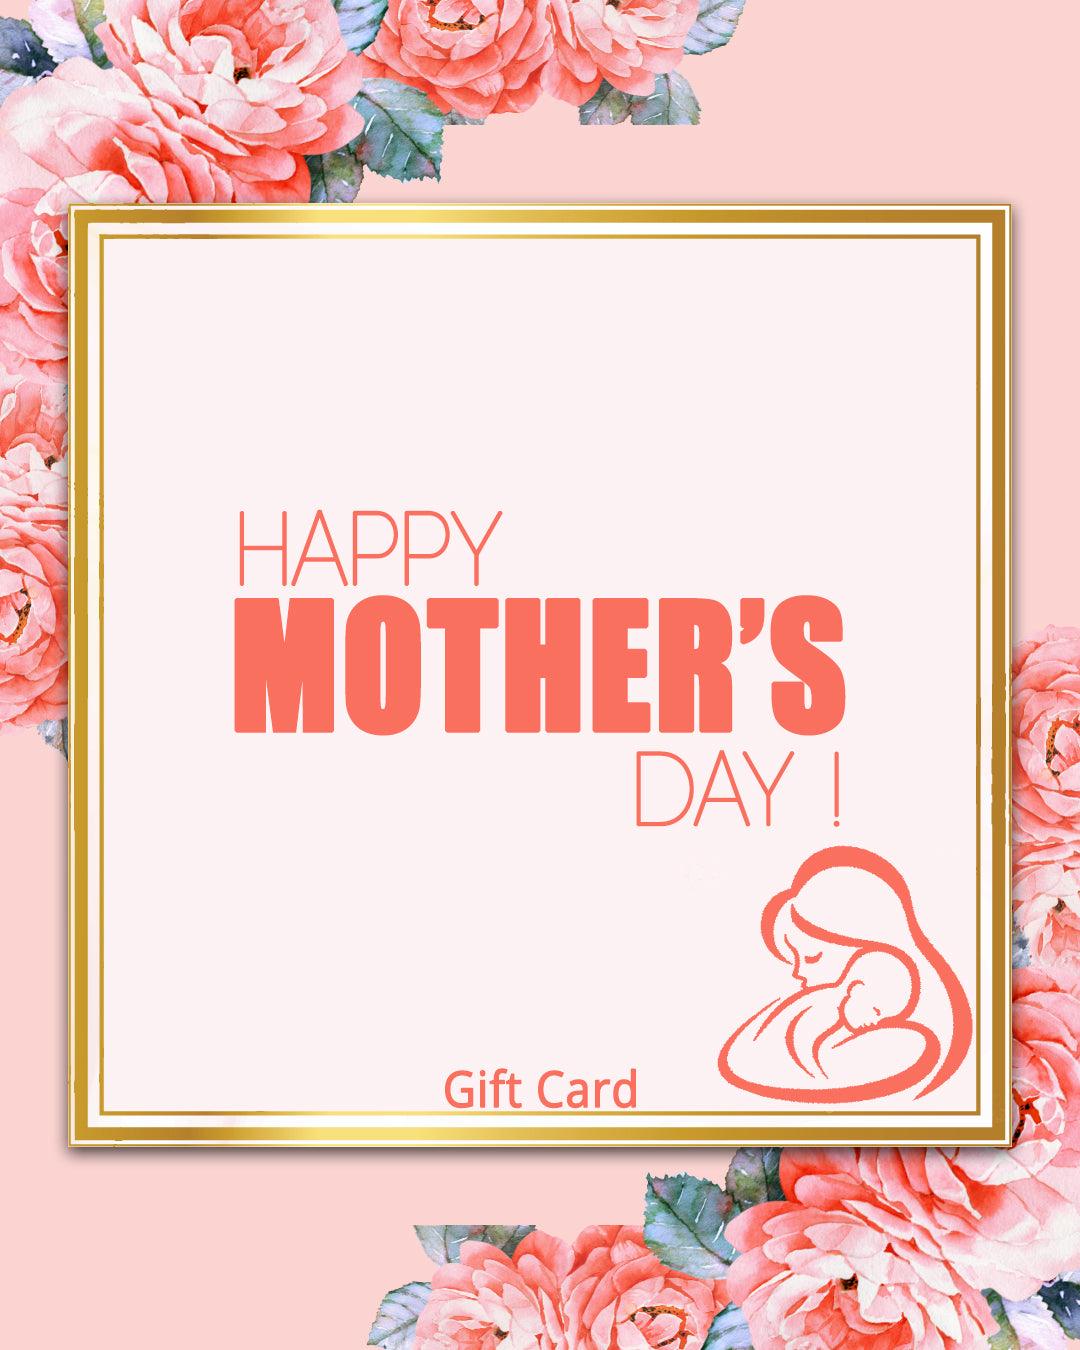 MOTHER DAY - MARKET 99